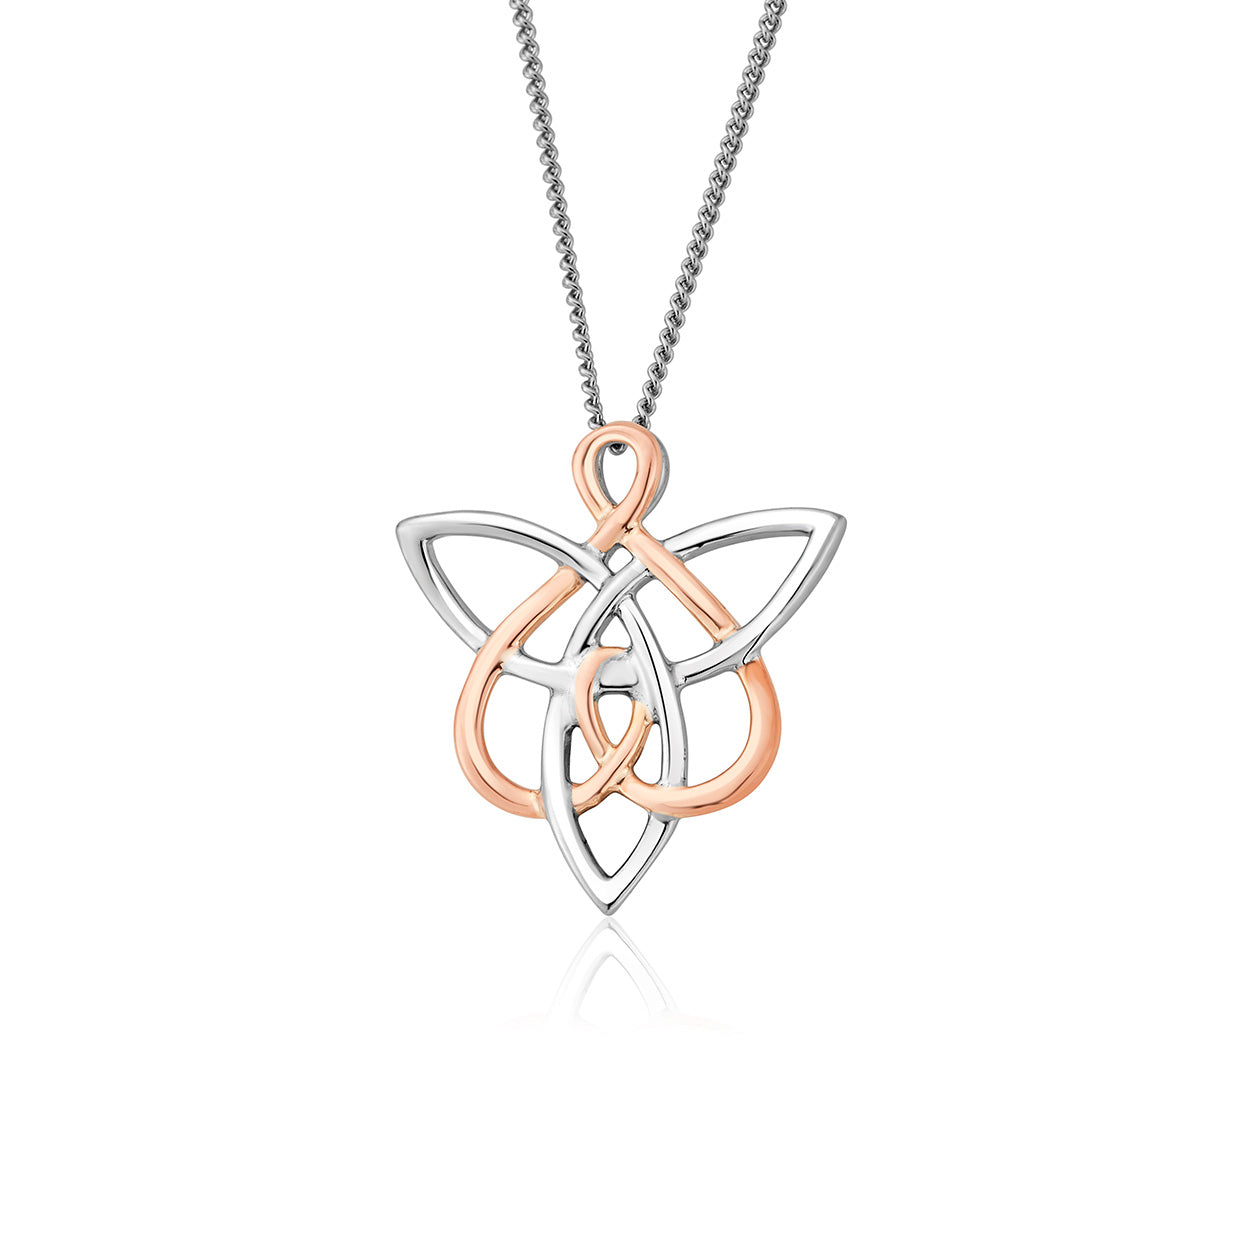 Clogau Fairies of the Mine White Topaz Sterling Silver Pendant Necklace